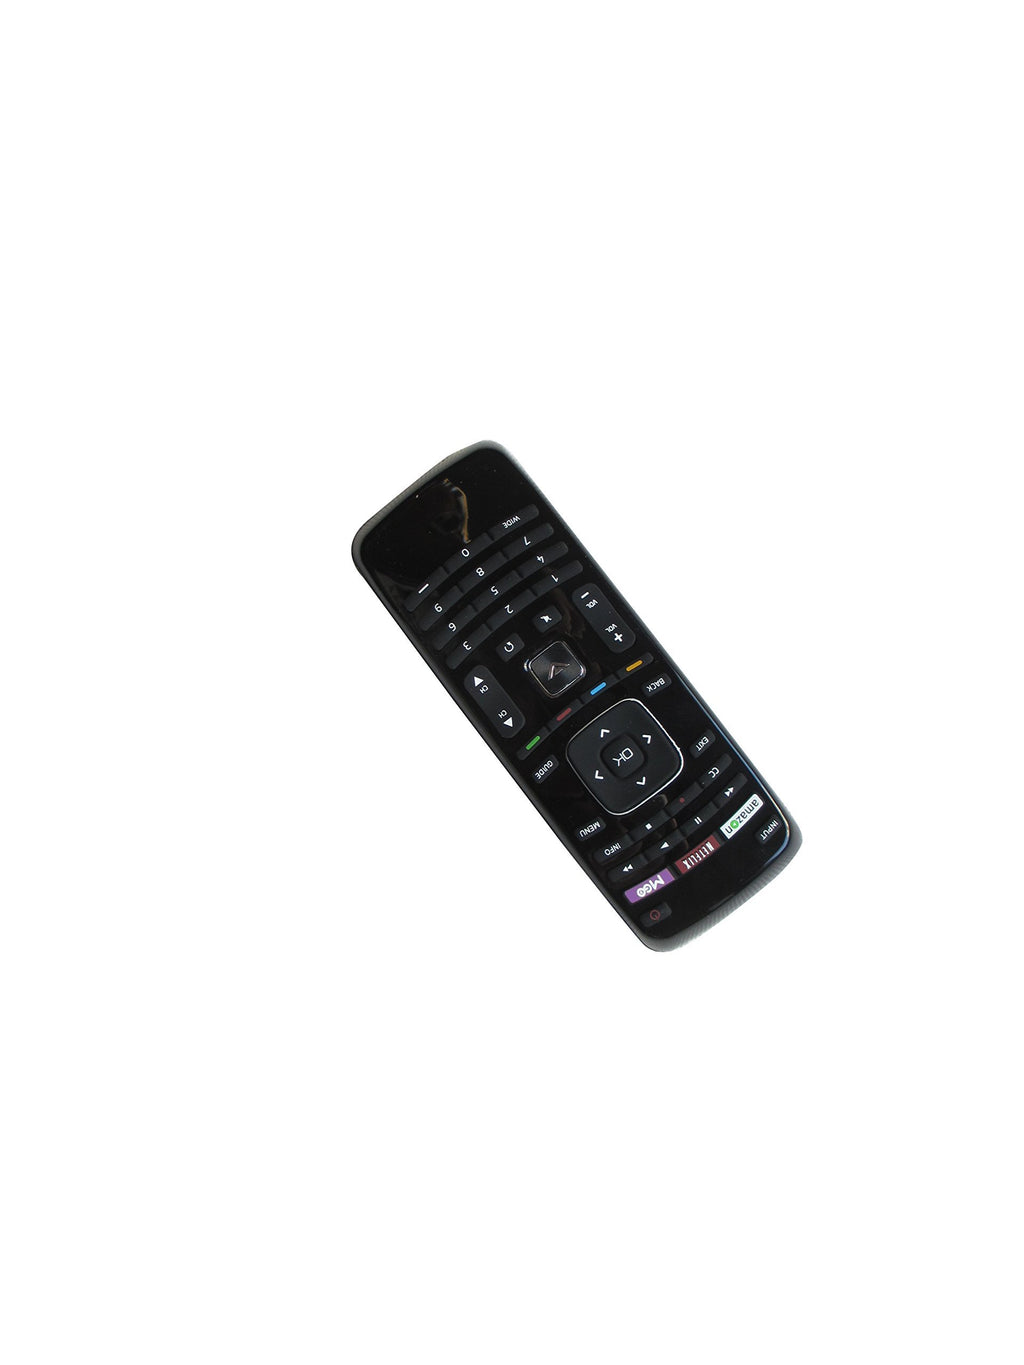 Universal Replacement Remote Control Fit for Vizio VR3P 0980-0305-4010 E422VA VX37LHDTV VX37L VR2 VO37LF E320ND E420ND VP42HDTV20A VOJ320F VOJ320M VX37LHDTV10A M260VA E421VA LCD LED Plasma HDTV TV